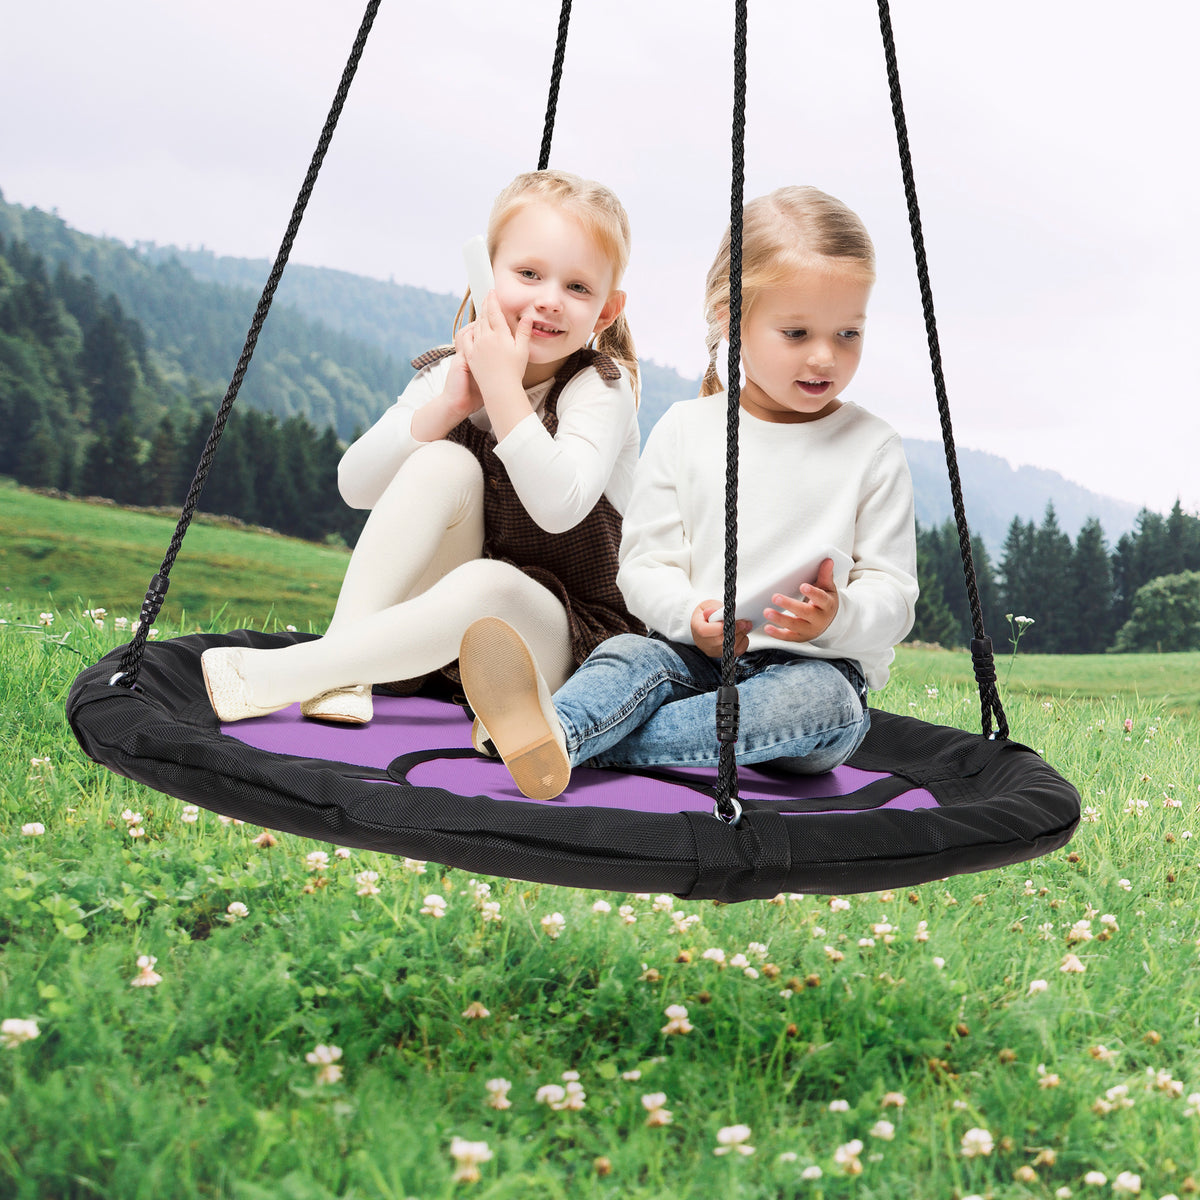 ZenSports 40'' Kids Flying Saucer Swing with Swing Stand Set 440lbs Heavy-Duty Frame Outdoor Fun Green